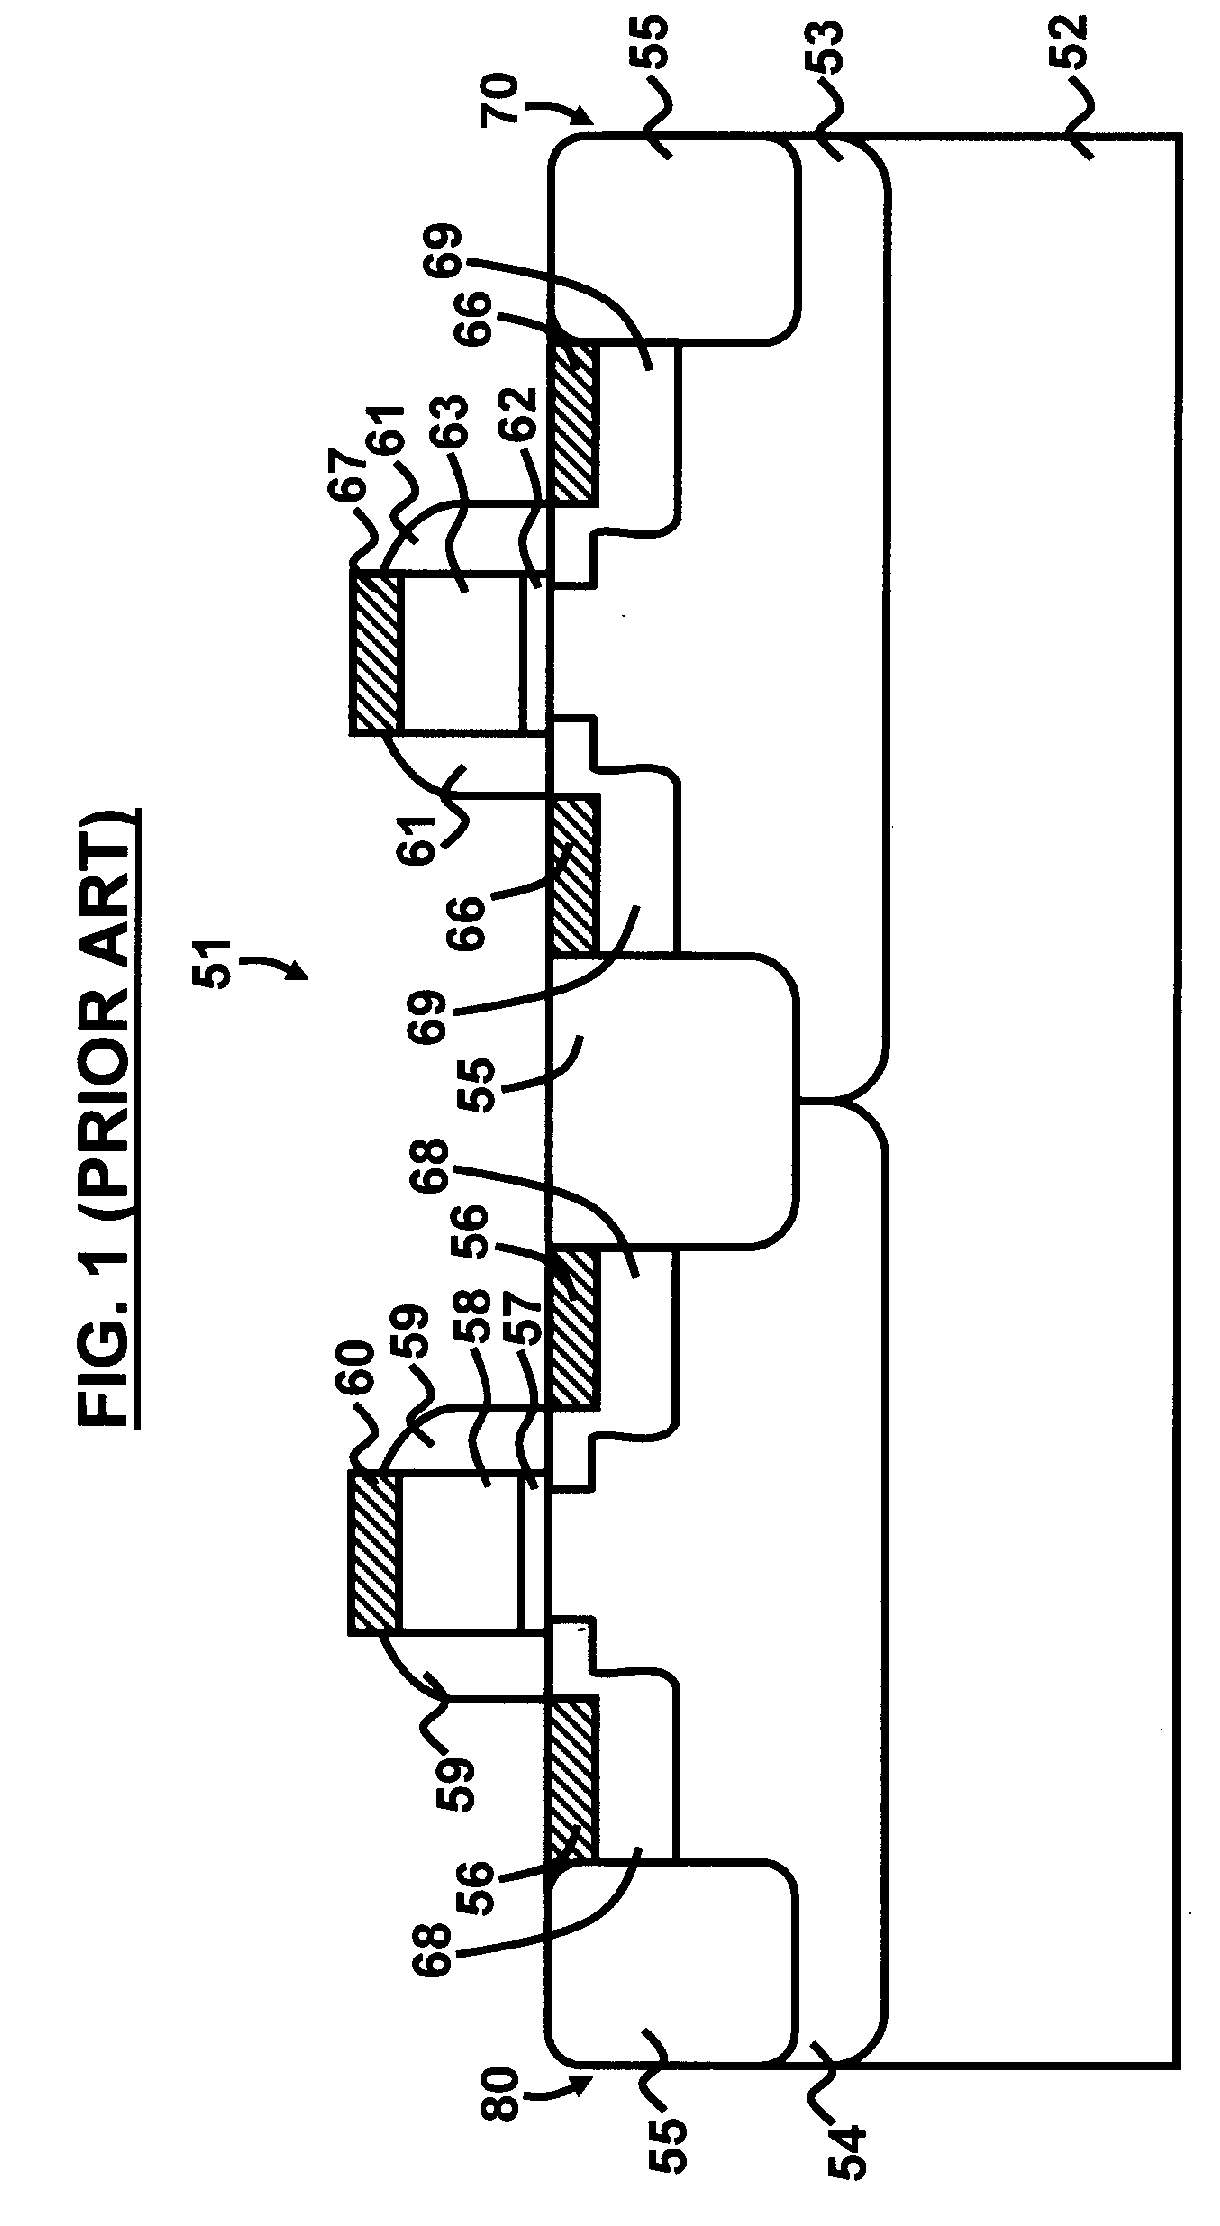 Method for forming self-aligned dual salicide in CMOS technologies